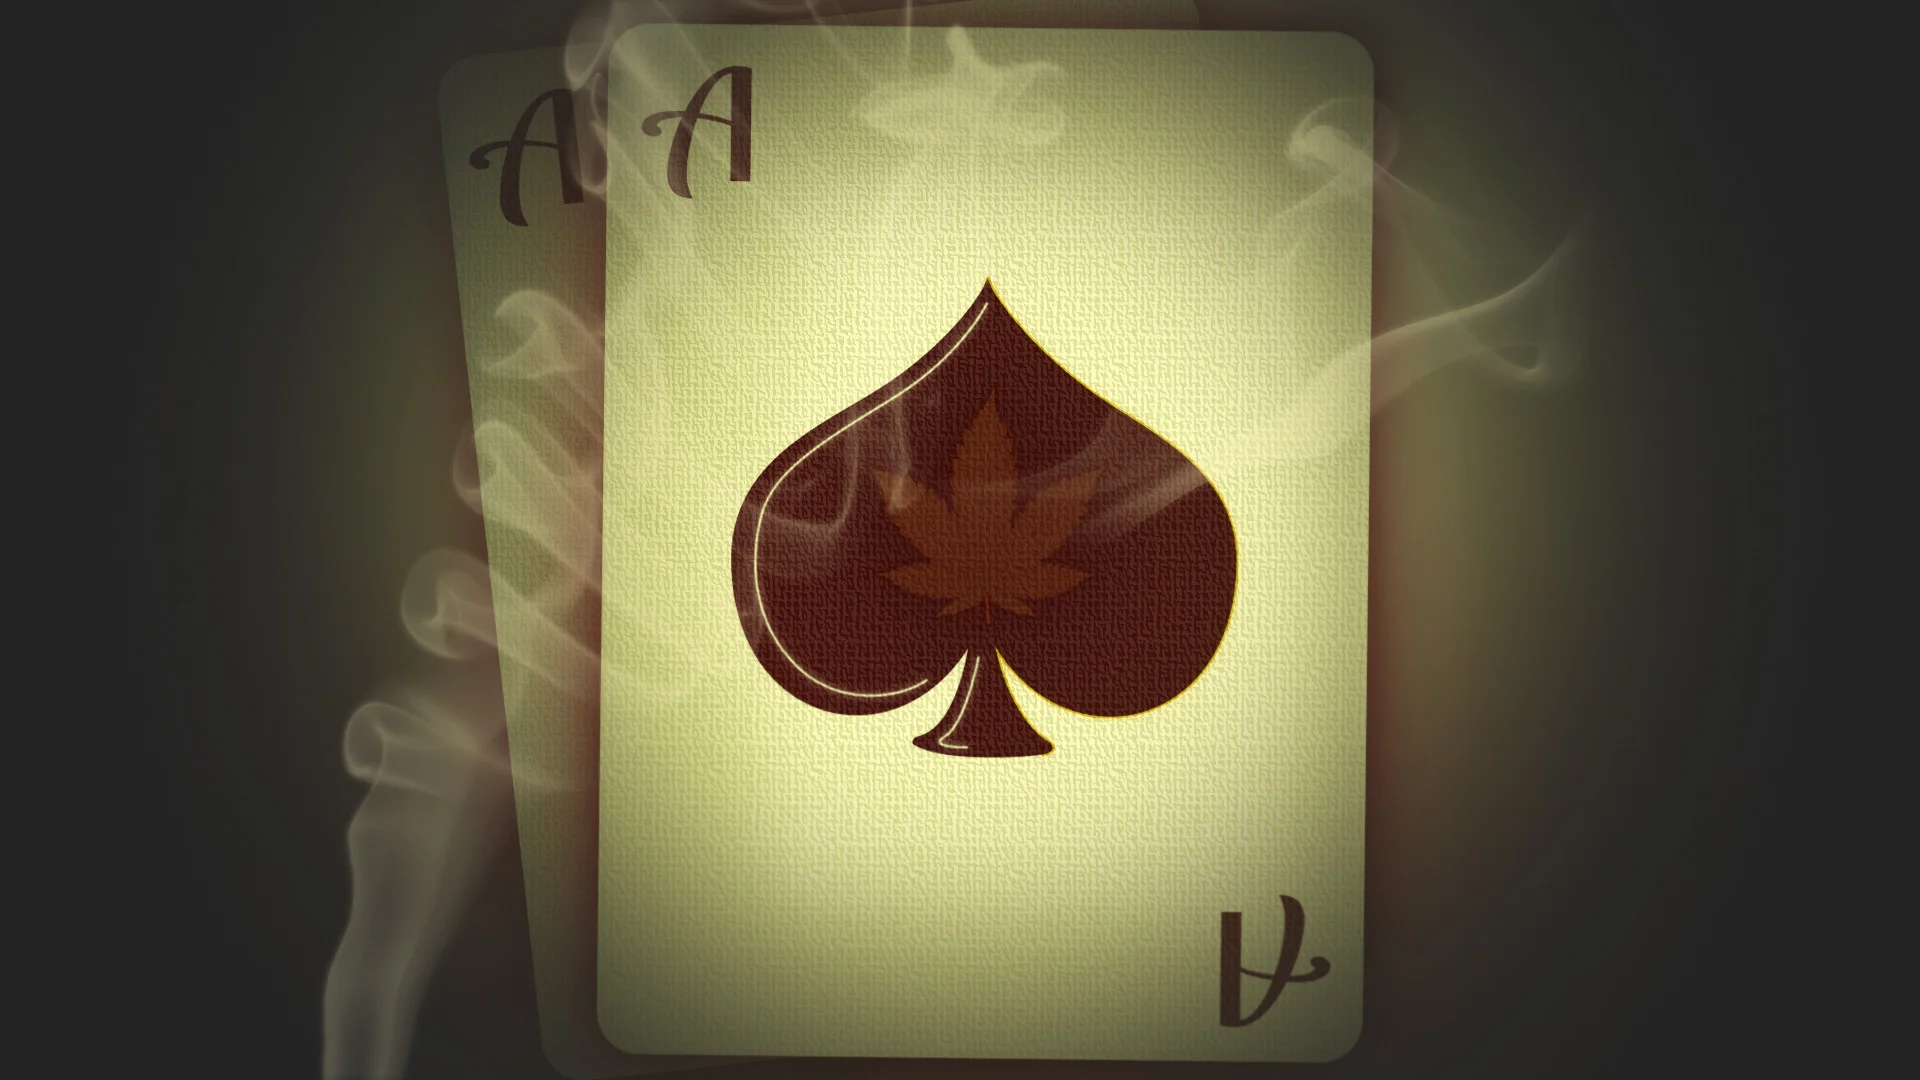 420 Ace of Spades Wallpaper (1920×1080) (x-post from /r/trees) …